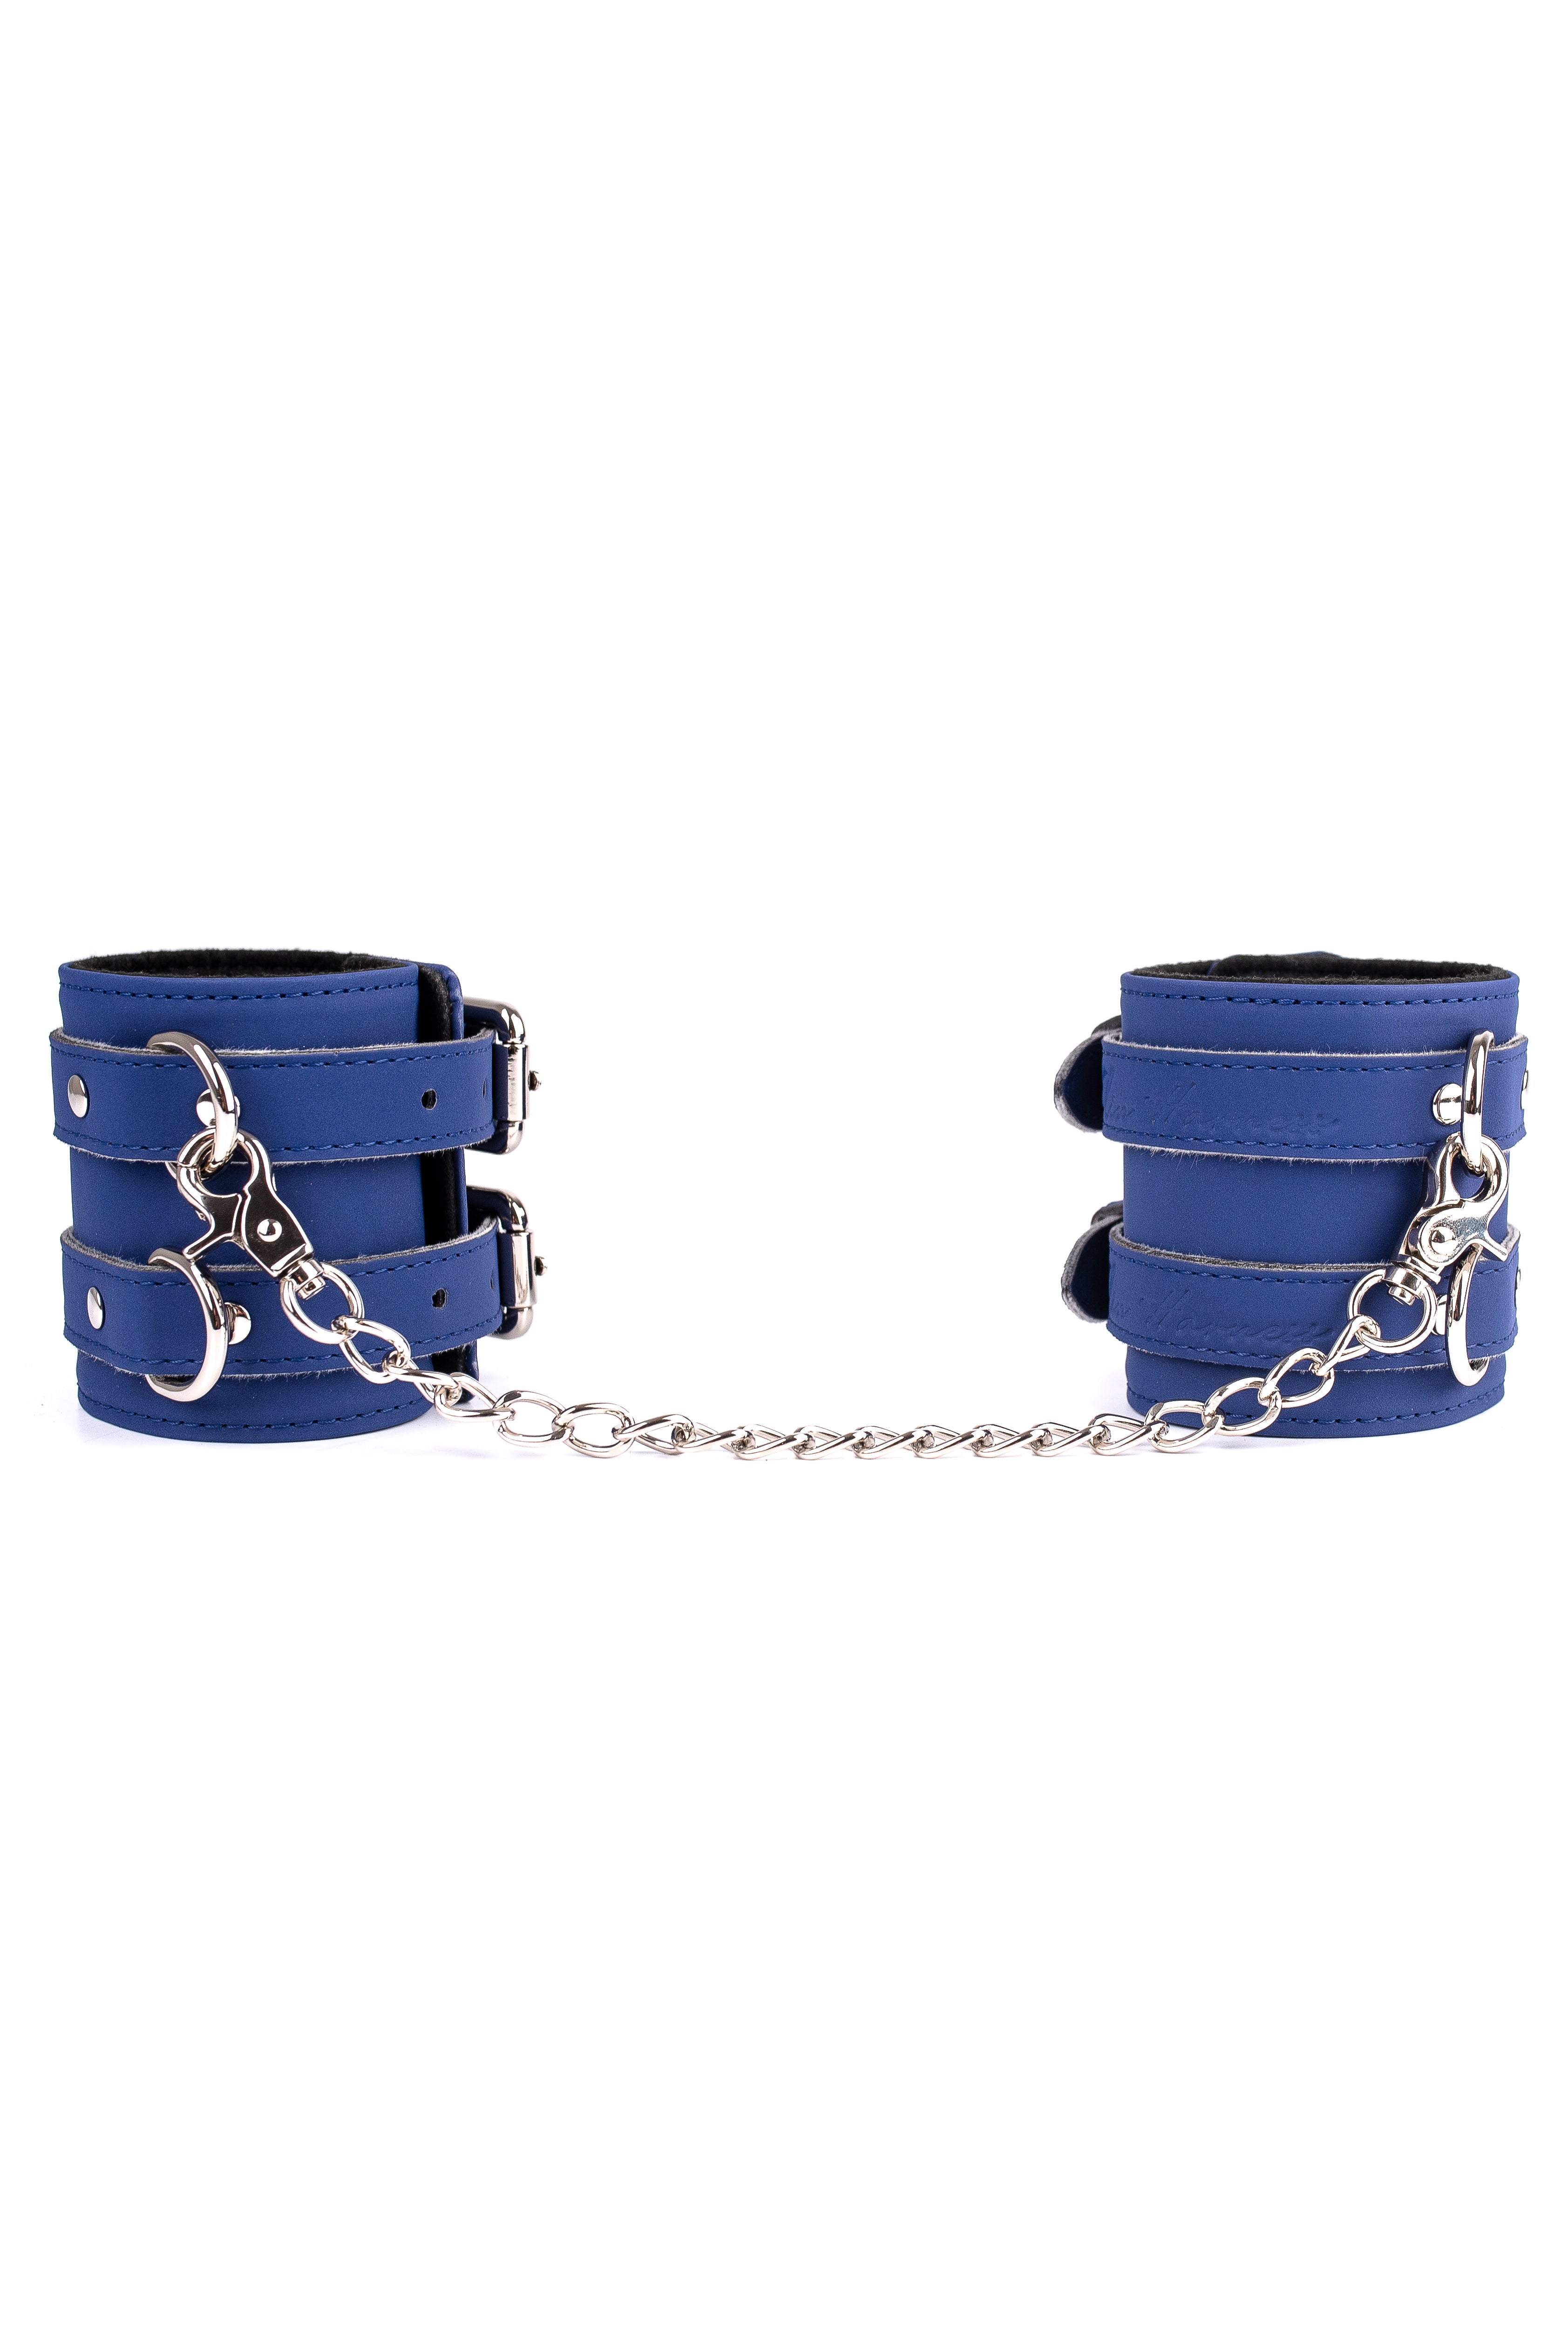 Vegan Leather Wide Handcuffs, Ankle cuffs with chain connector